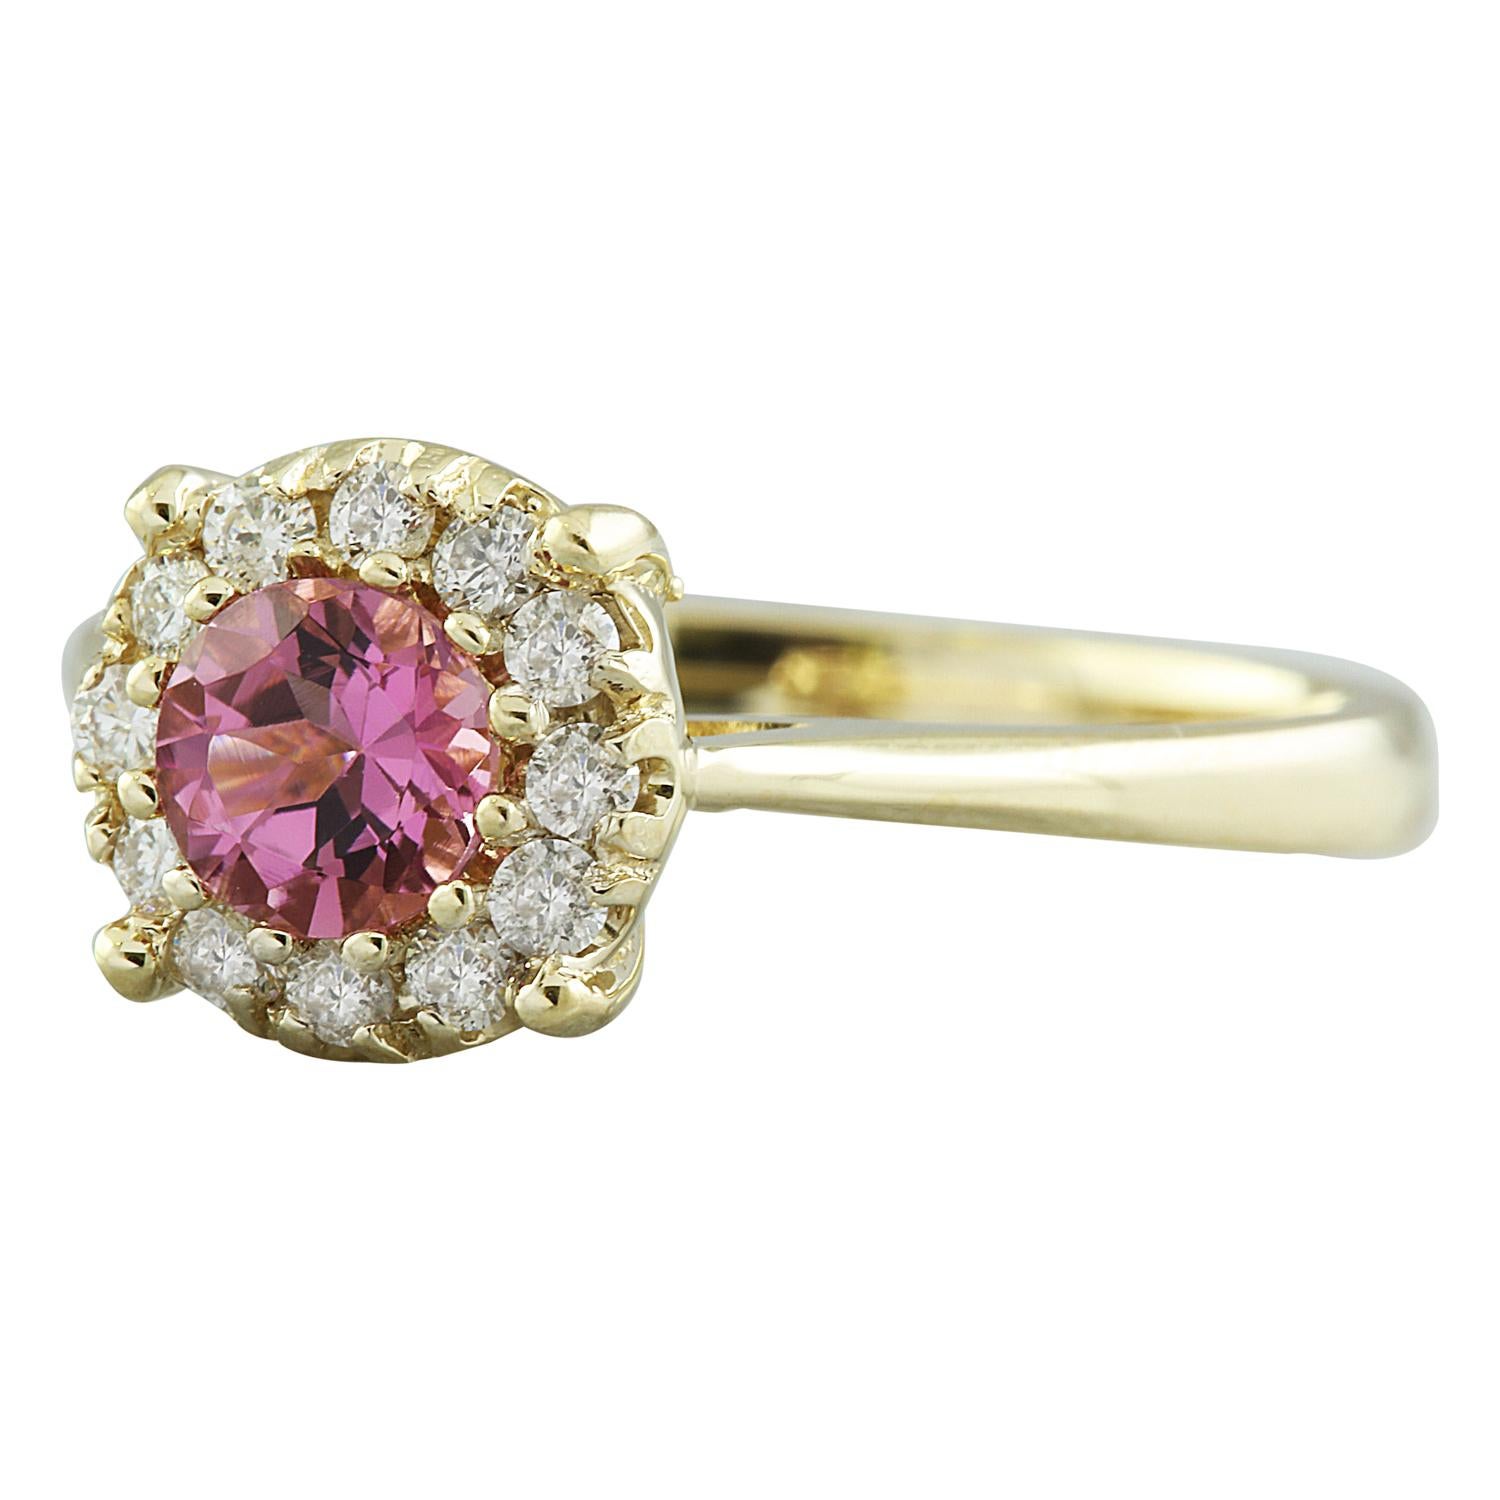 0.72 Carat Natural Tourmaline 14 Karat Solid Yellow Gold Diamond Ring
Stamped: 14K 
Total Ring Weight: 2.9 Grams 
Tourmaline Weight: 0.50 Carat (5.00x5.00 Millimeters)  
Diamond Weight: 0.22 Carat (F-G Color, VS2-SI1 Clarity )
Quantity: 12
Face